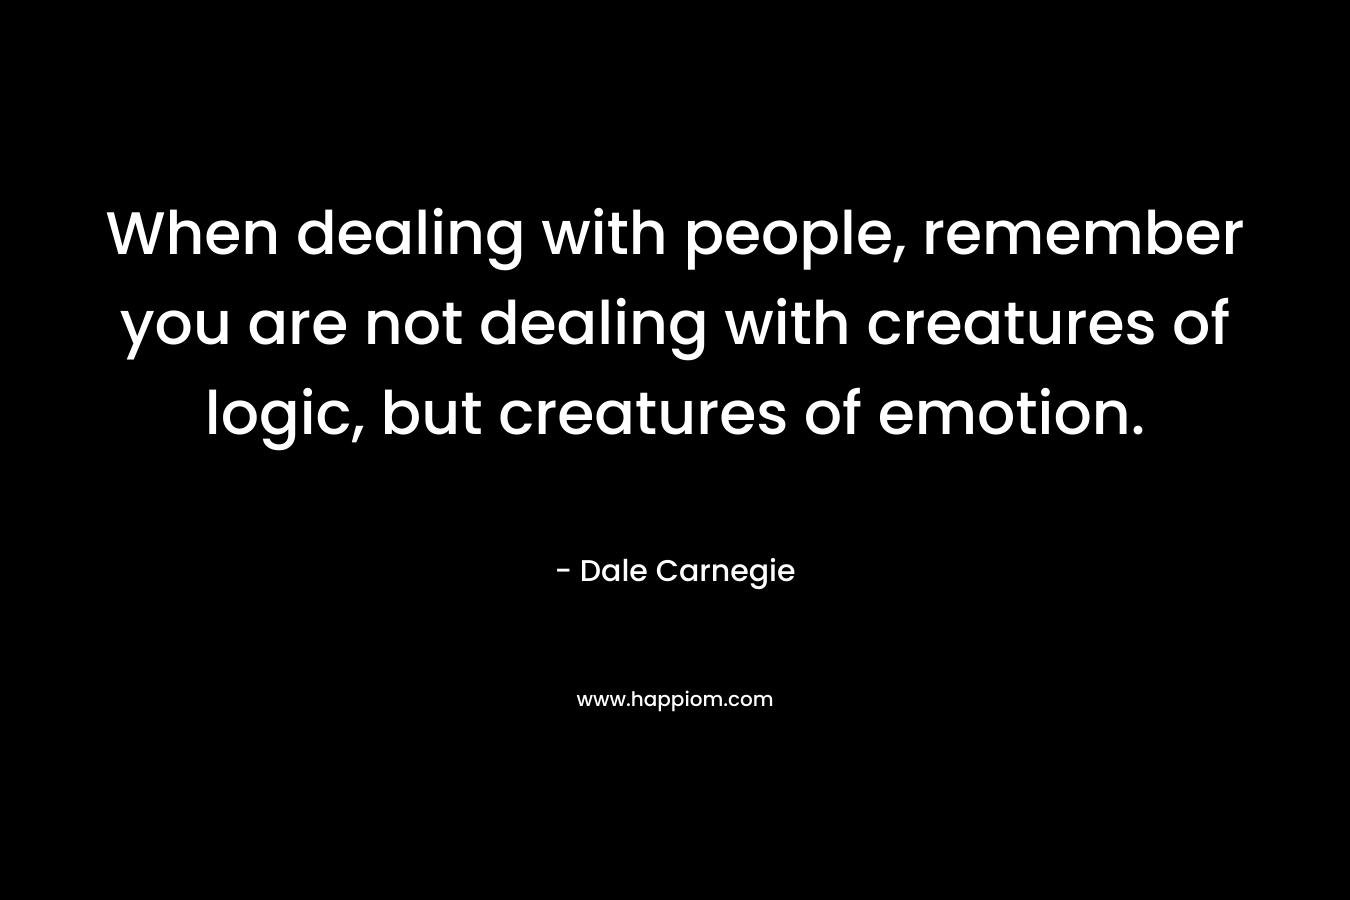 When dealing with people, remember you are not dealing with creatures of logic, but creatures of emotion. – Dale Carnegie